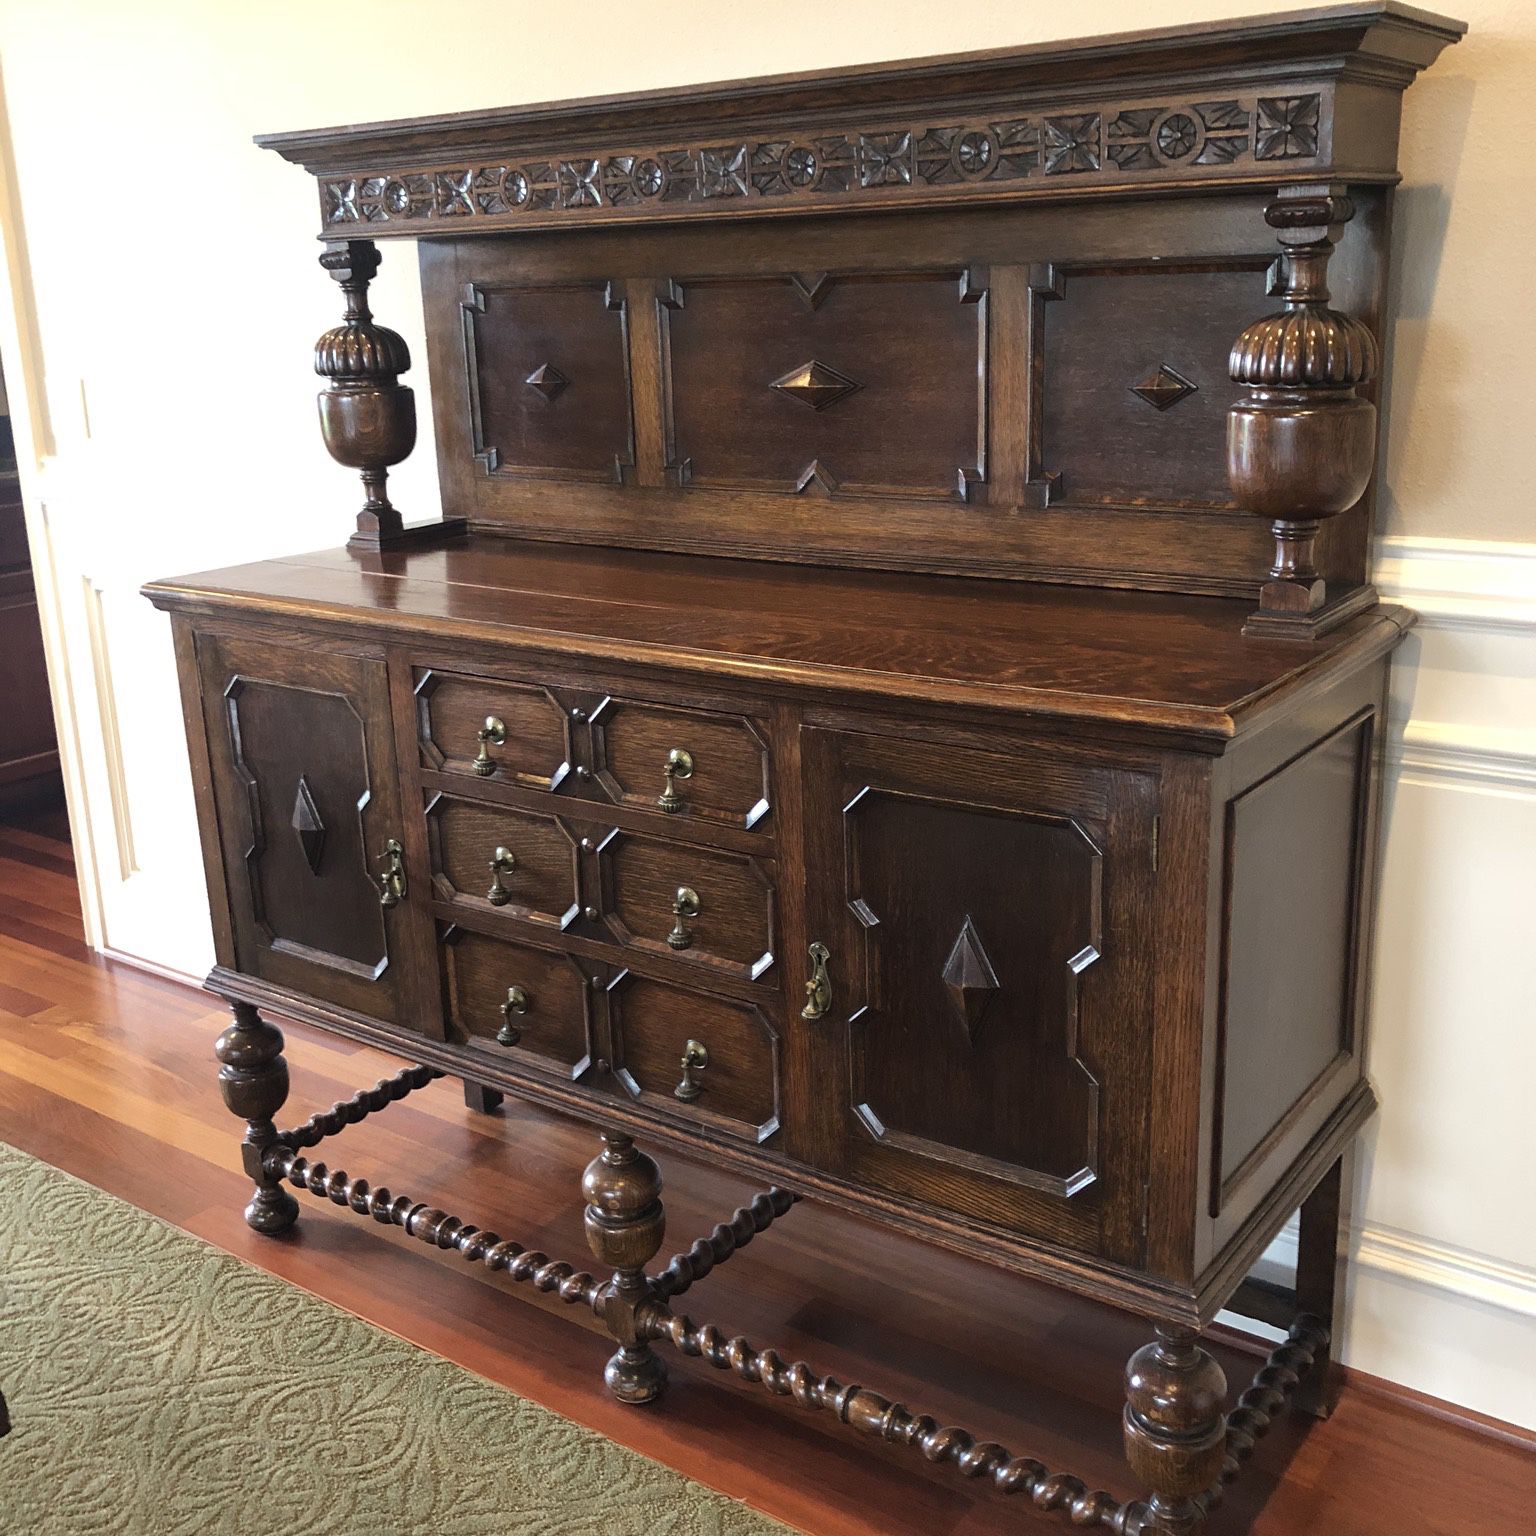 Beautiful Antique Sideboard With Ornate Wood Work